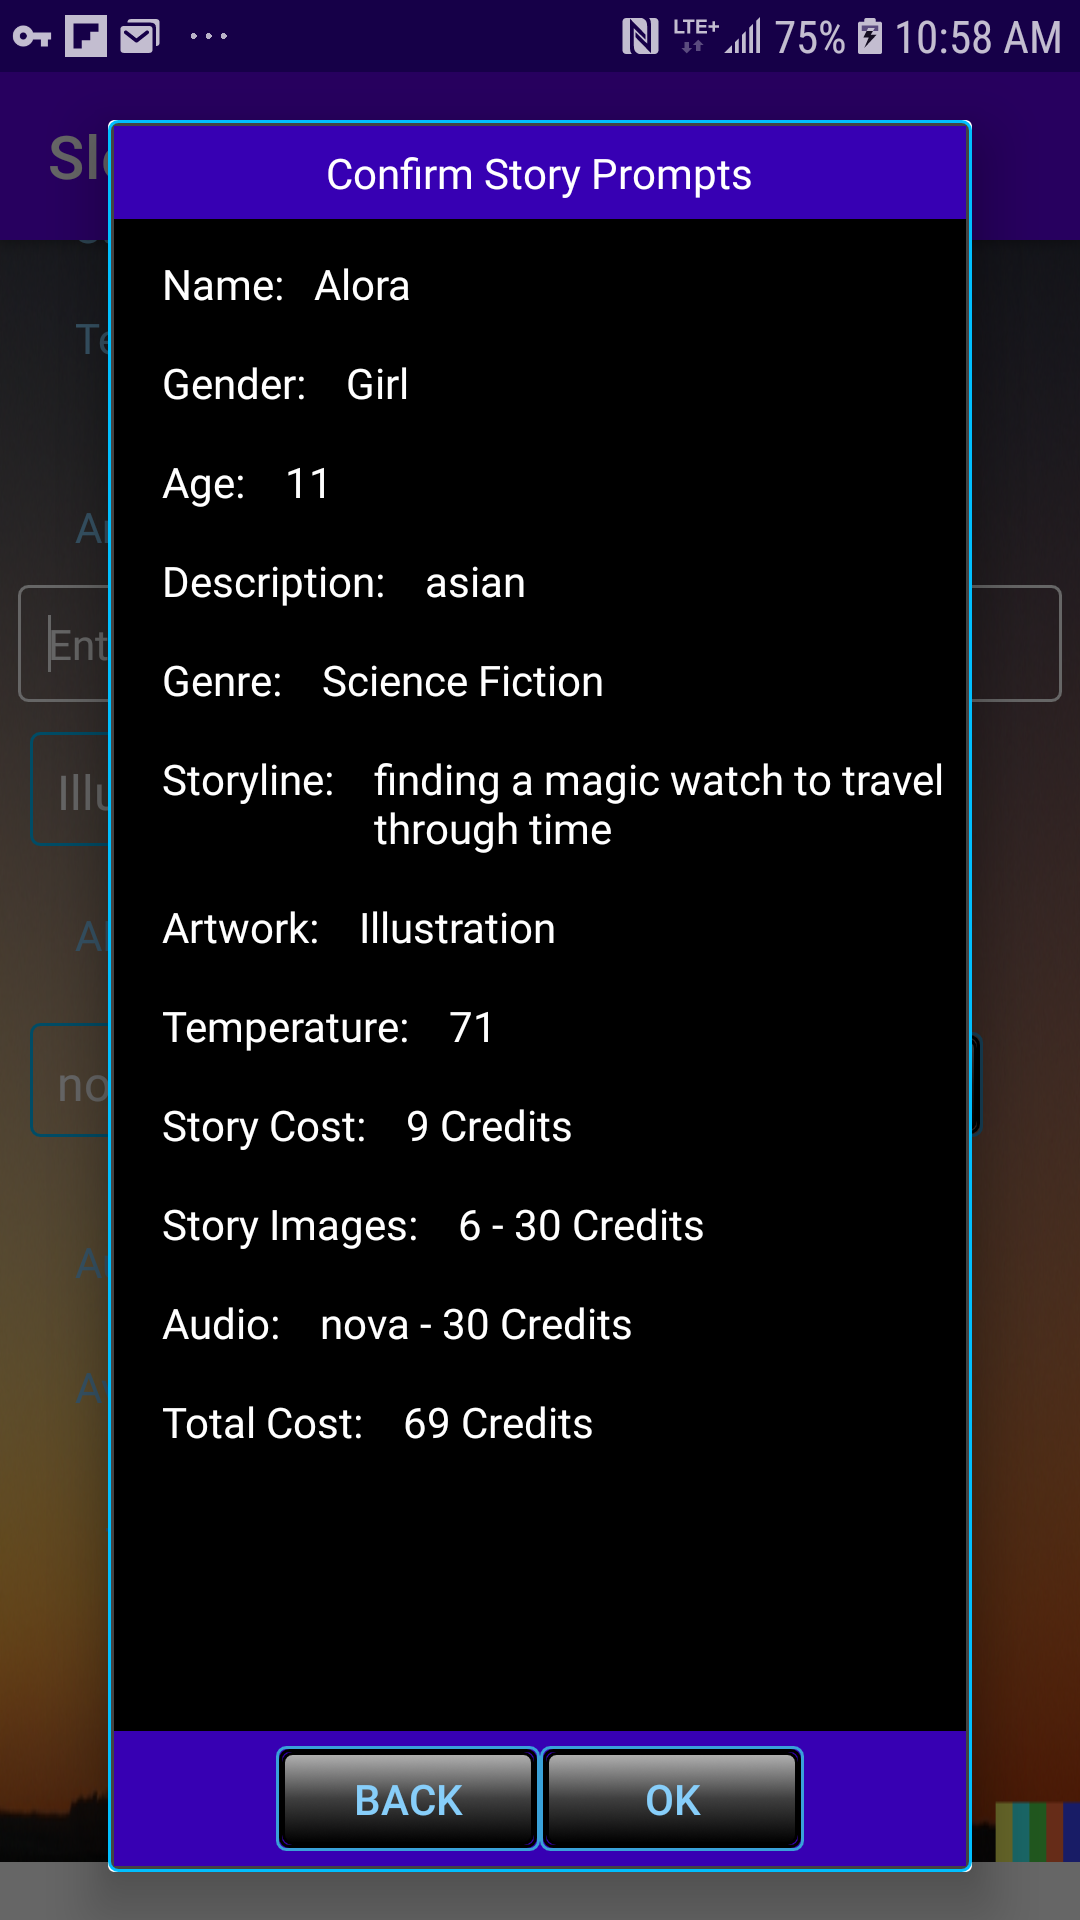 Confirm your story selection.